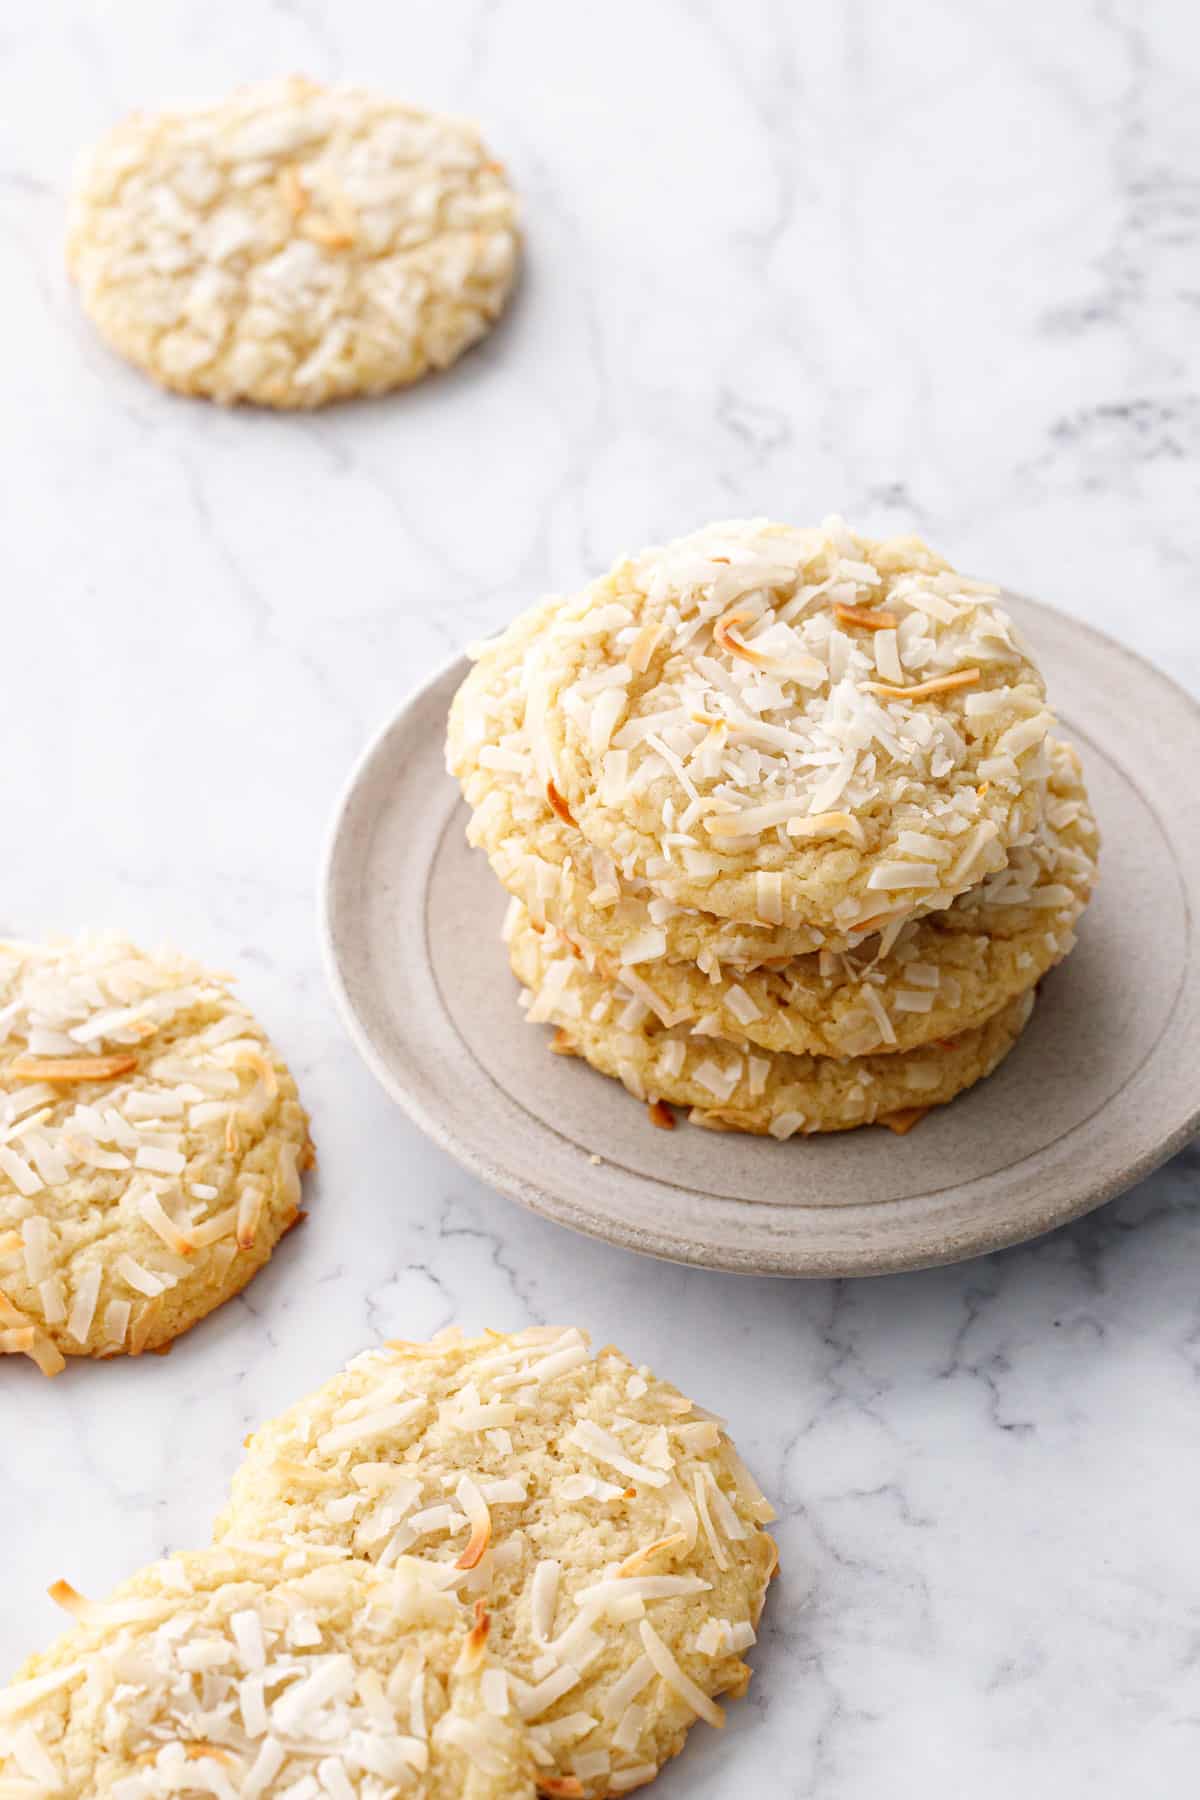 Stack of four Toasted Coconut Sugar Cookies on a gray plate, a few more cookies on the side on a marble background.